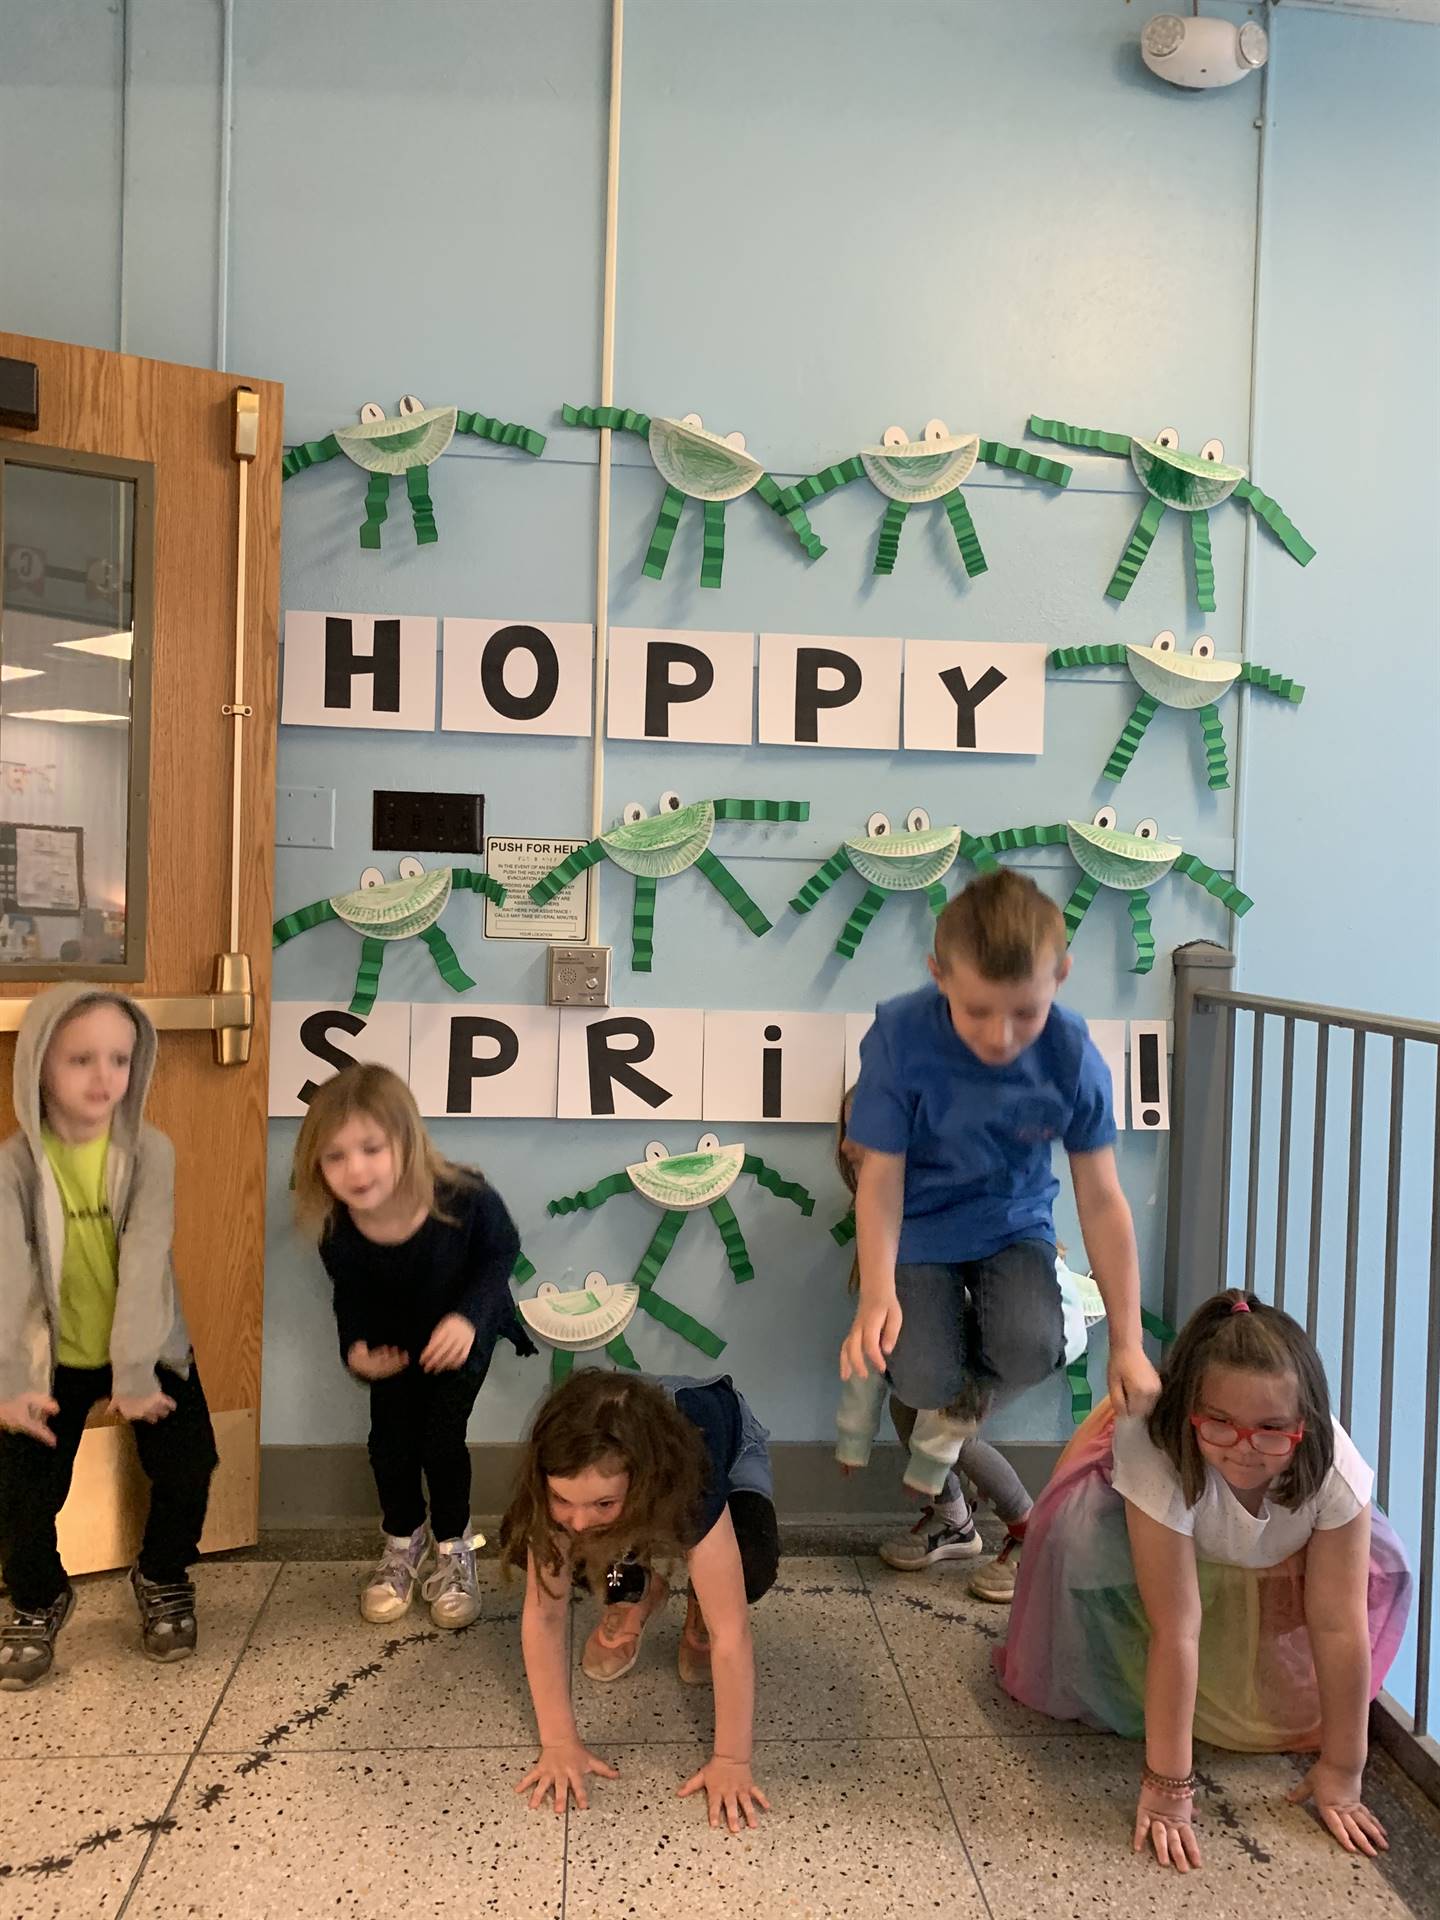 5 students hopping like frogs. background is sign "hoppy spring" with paper craft frogs.